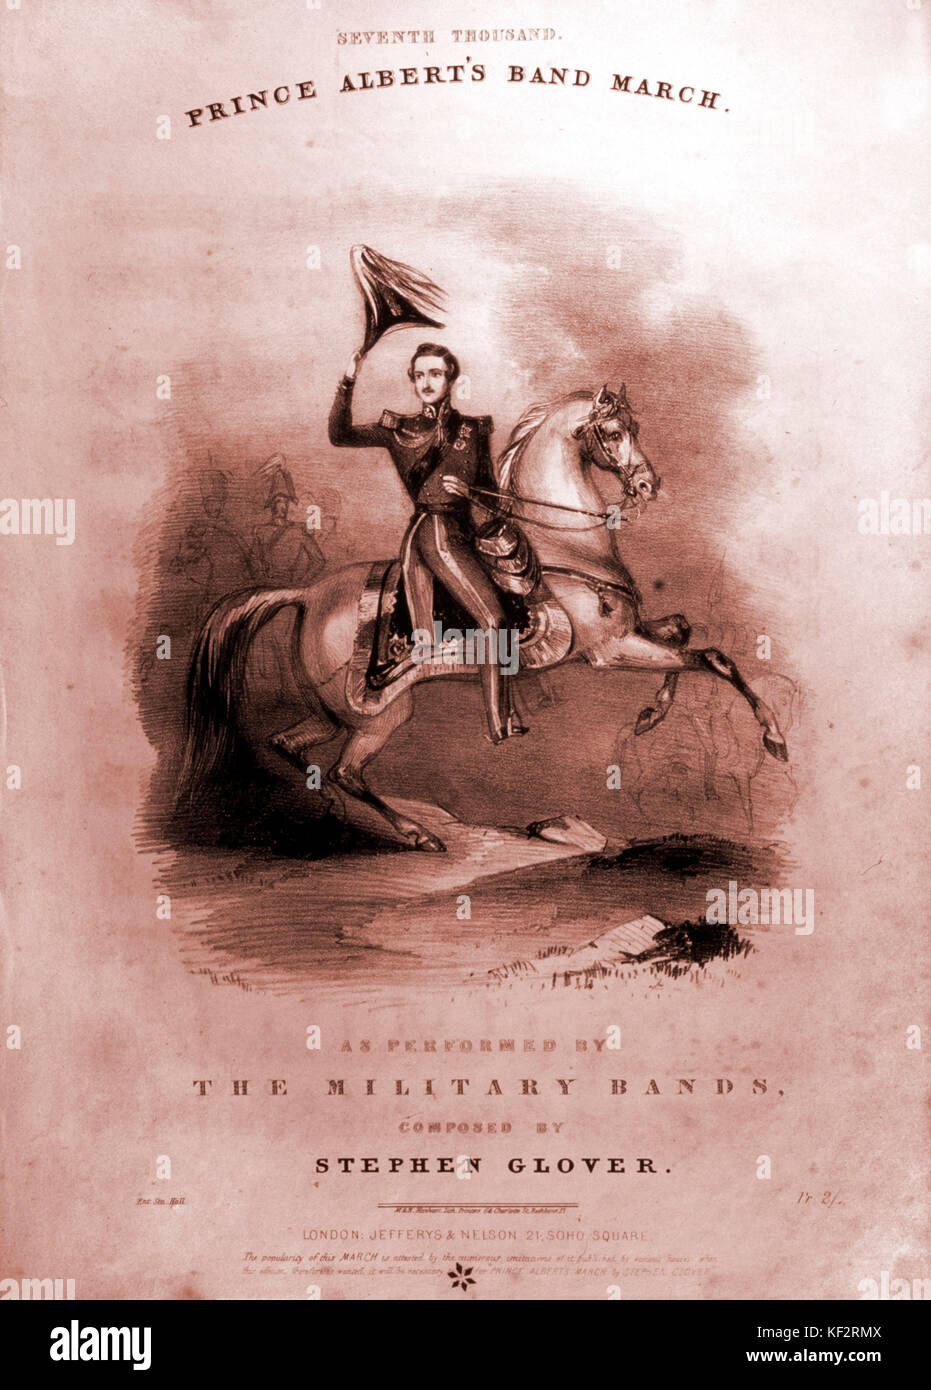 VICTORIA & ALBERT - Prince Albert's Band March Score cover showing Prince Albert riding on horseback. Music by Stephen Glover, c1840 Stock Photo